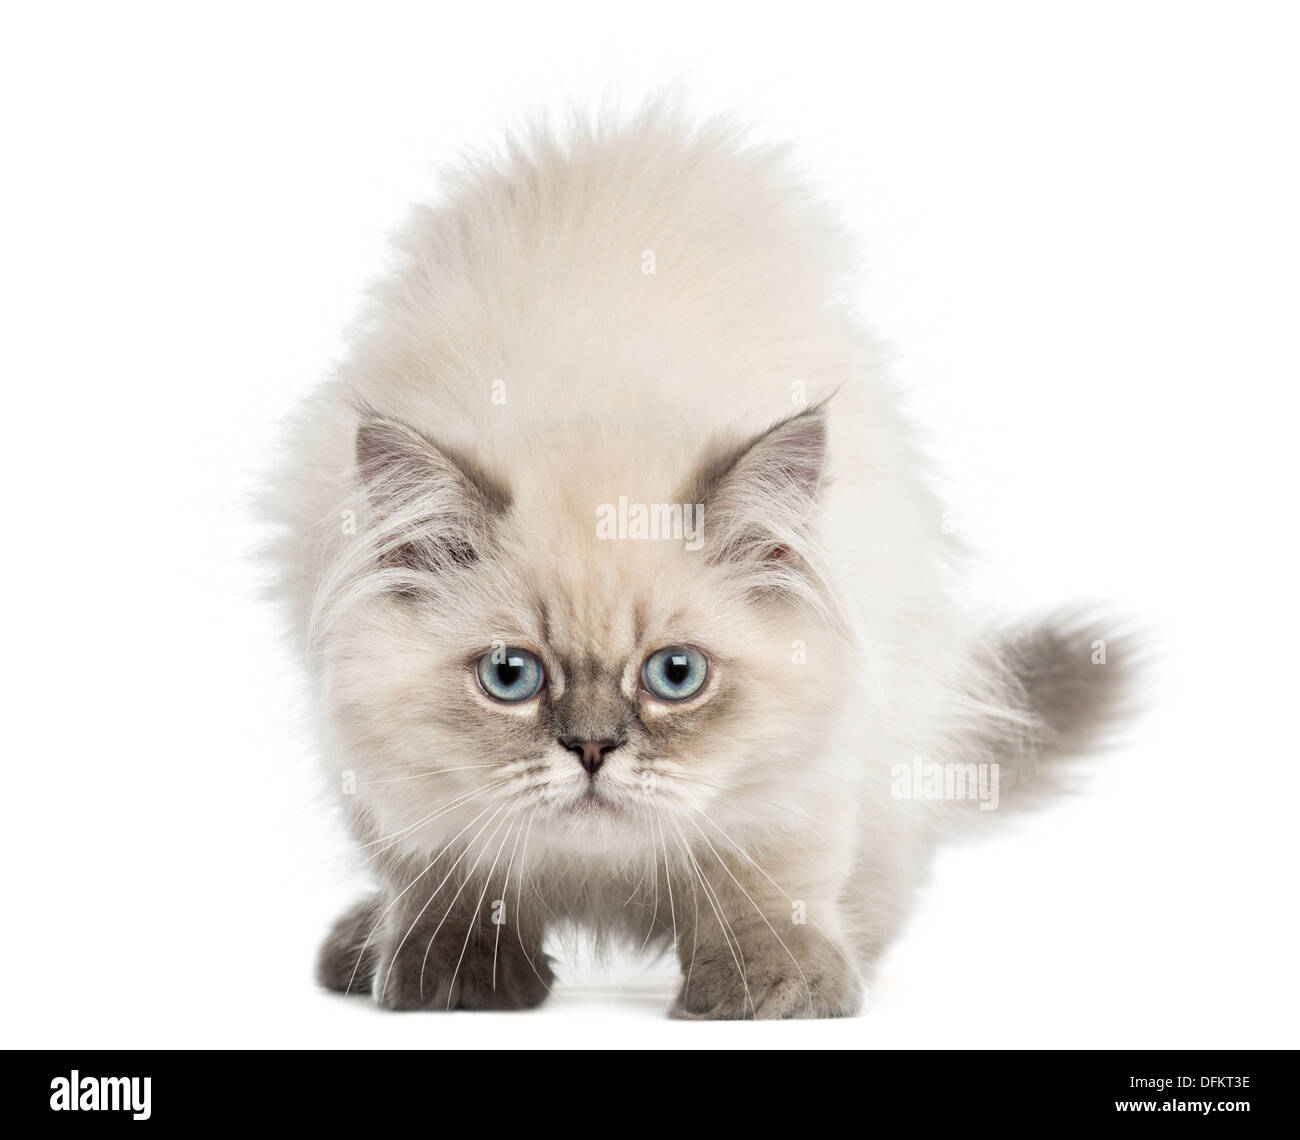 British Longhair kitten facing, looking at the camera, 5 months old, against white background Stock Photo